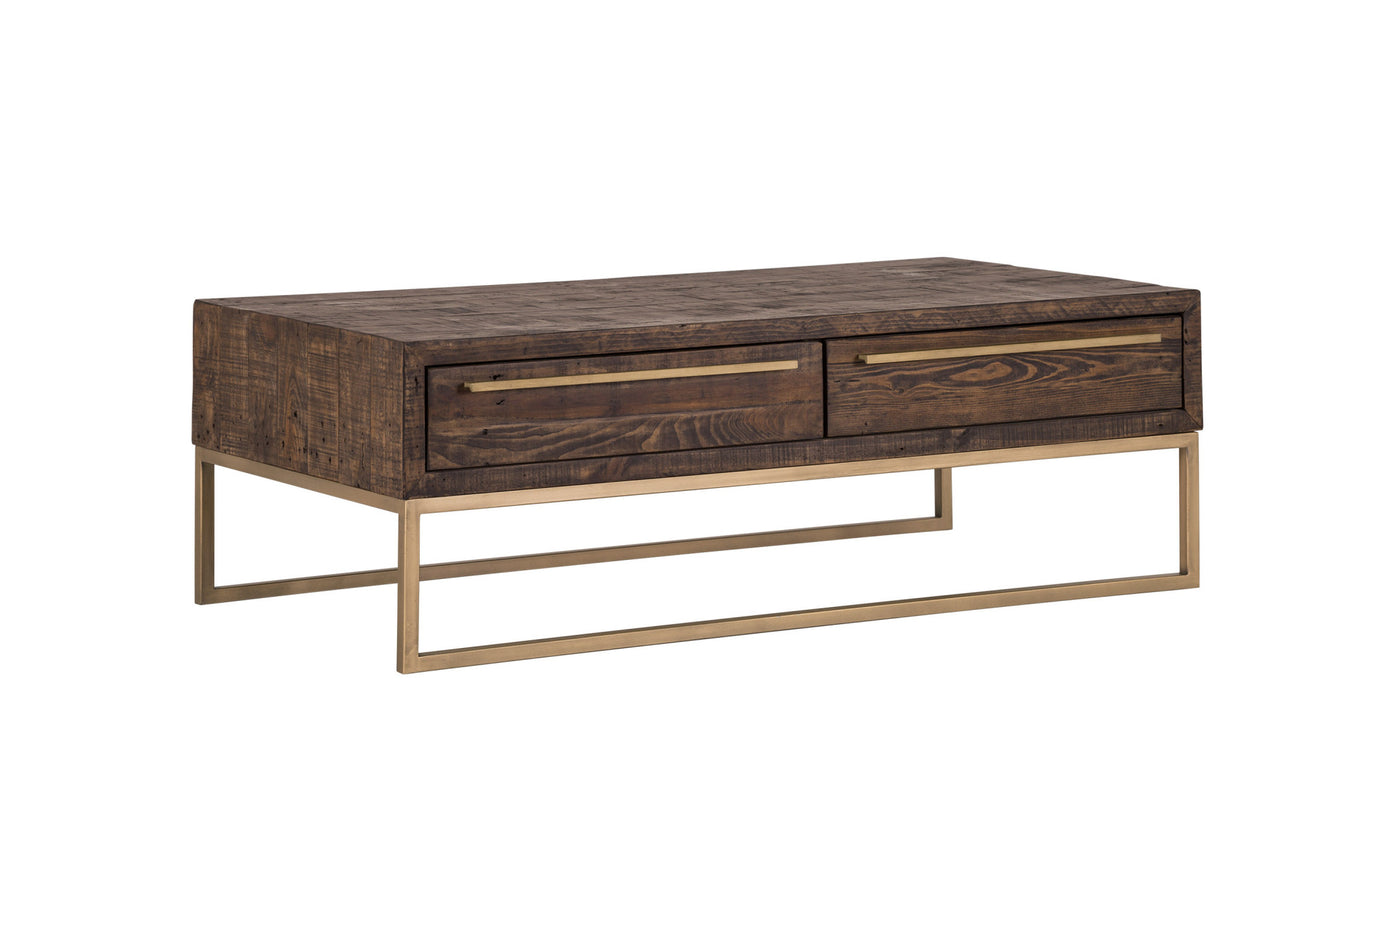 47" Gold And Dark Brown Rectangular Coffee Table With Drawers